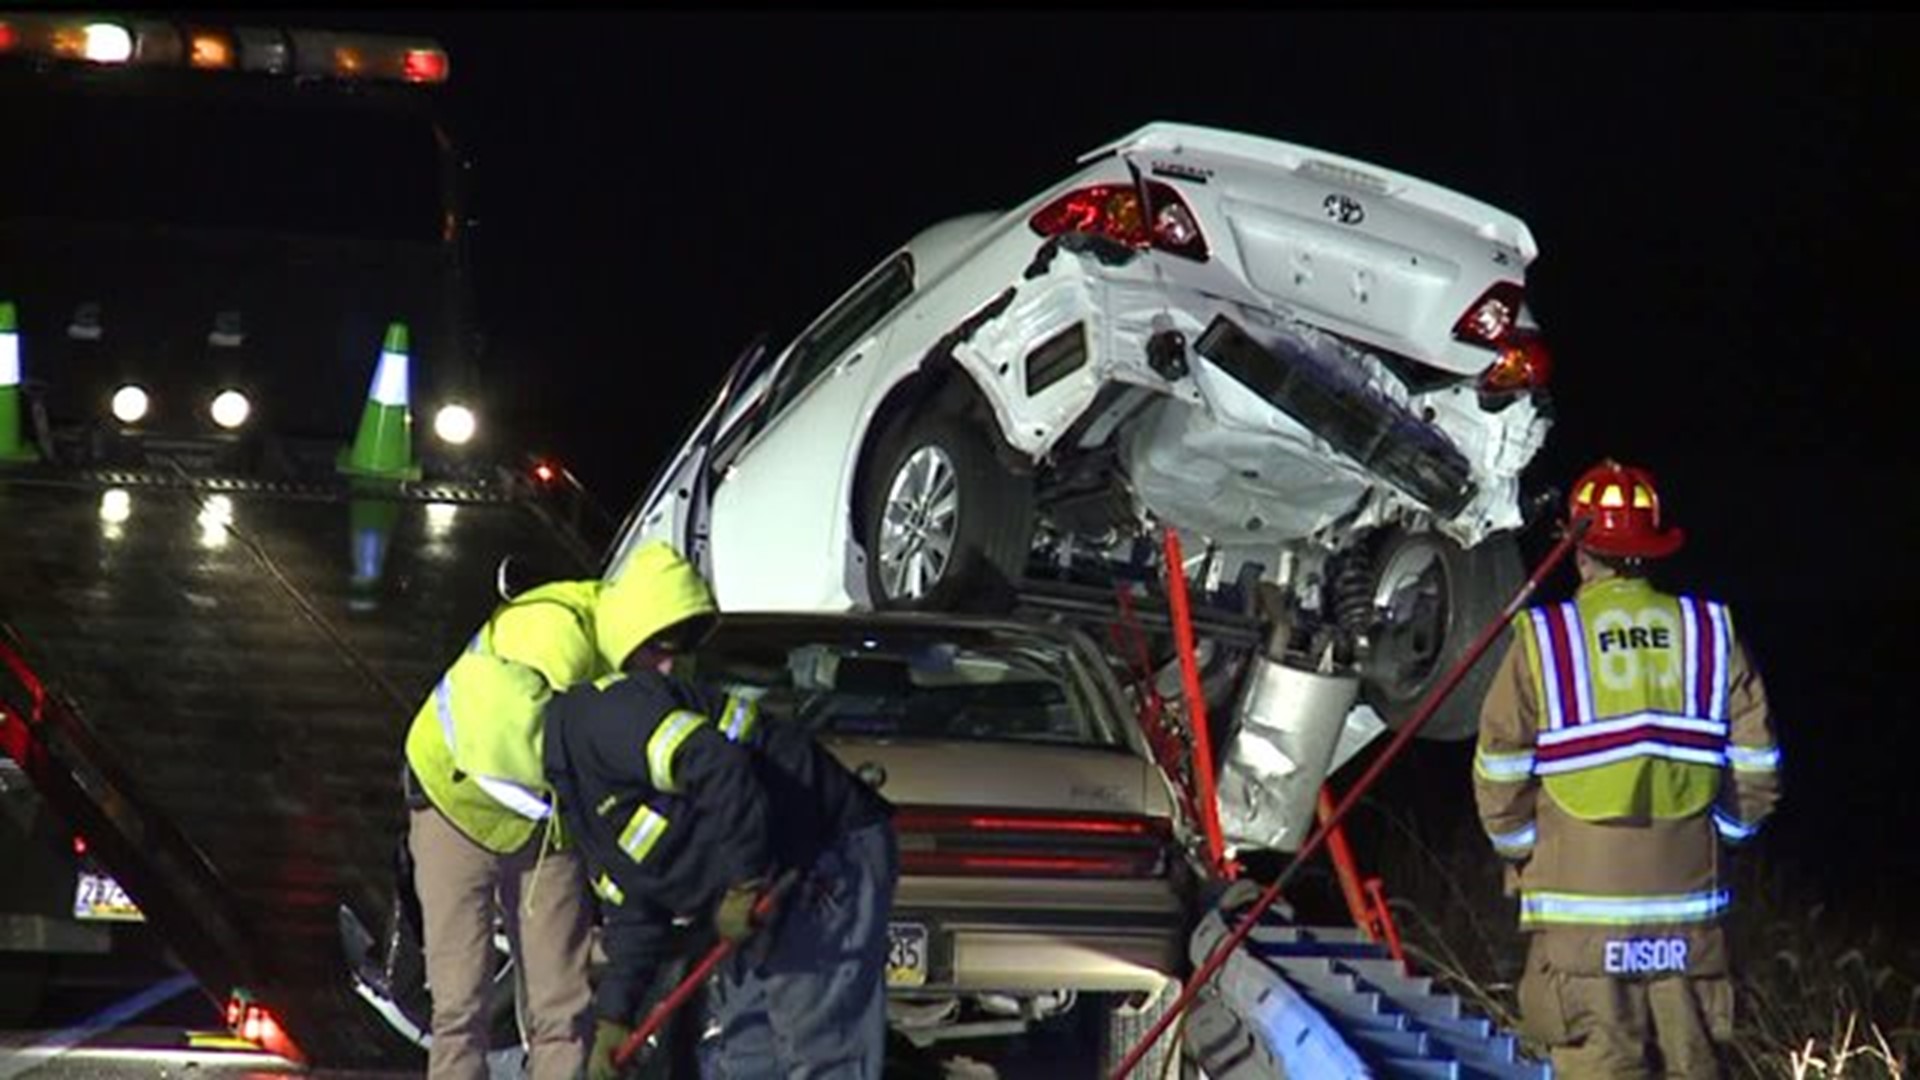 Injuries in four car crash on Route 283